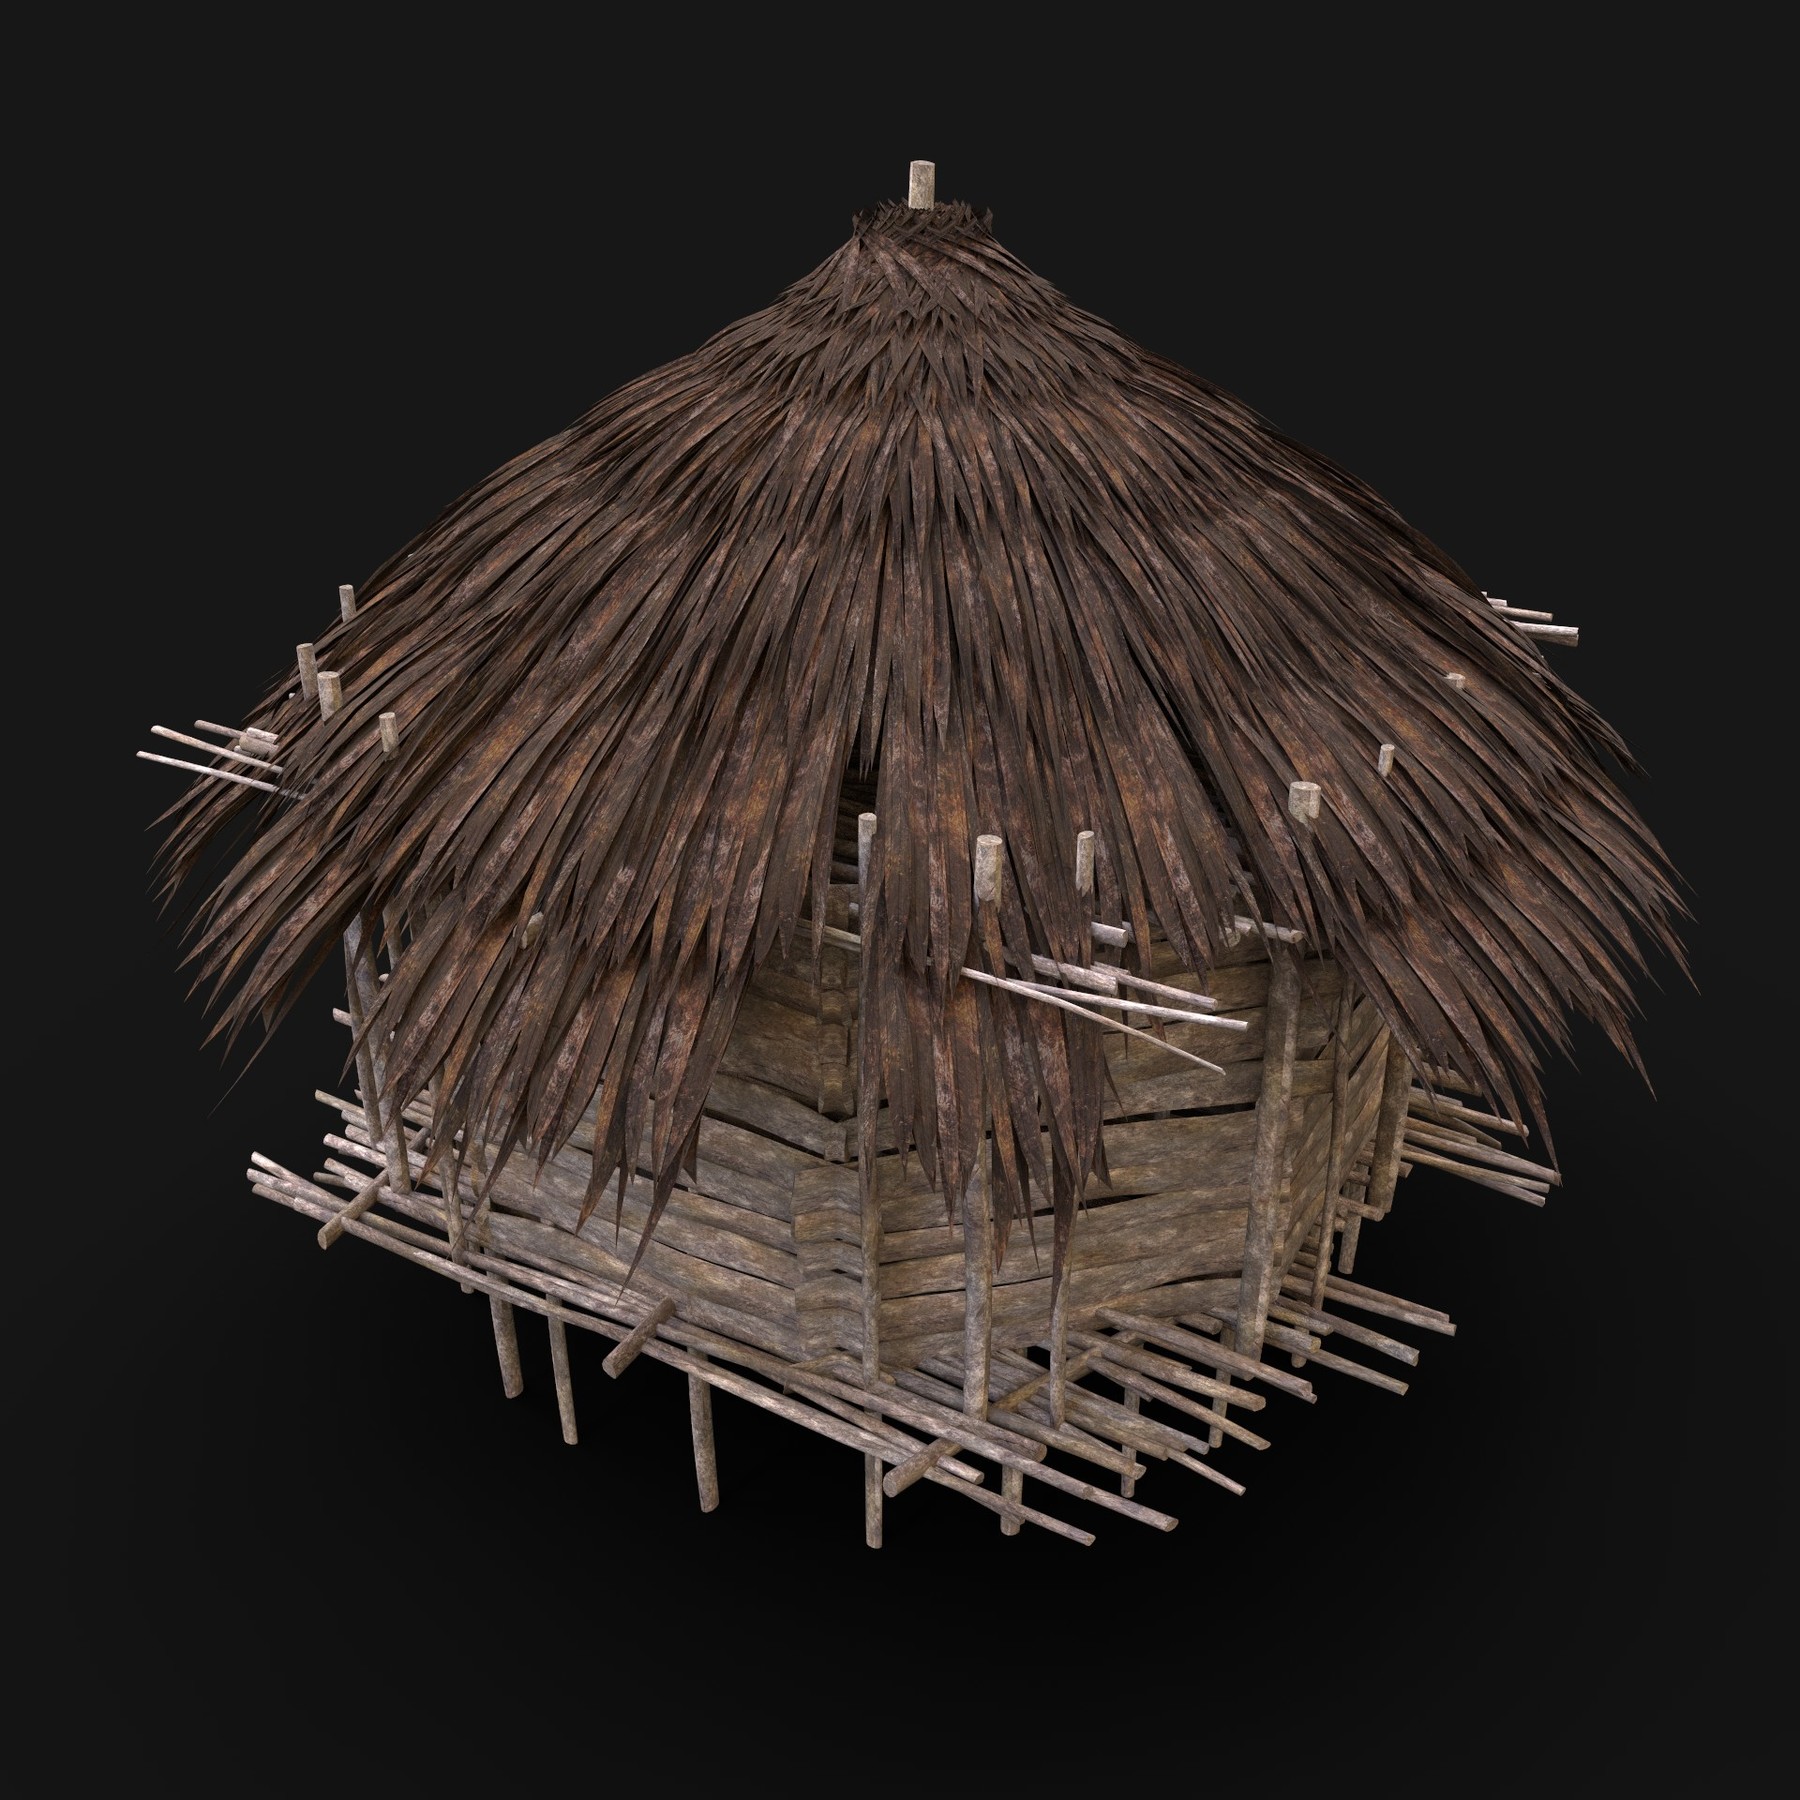 3D model SIMPLE TRIBAL JUNGLE PRIMAL HUT HOUSE TENT TREE SURVIVAL VR / AR /  low-poly